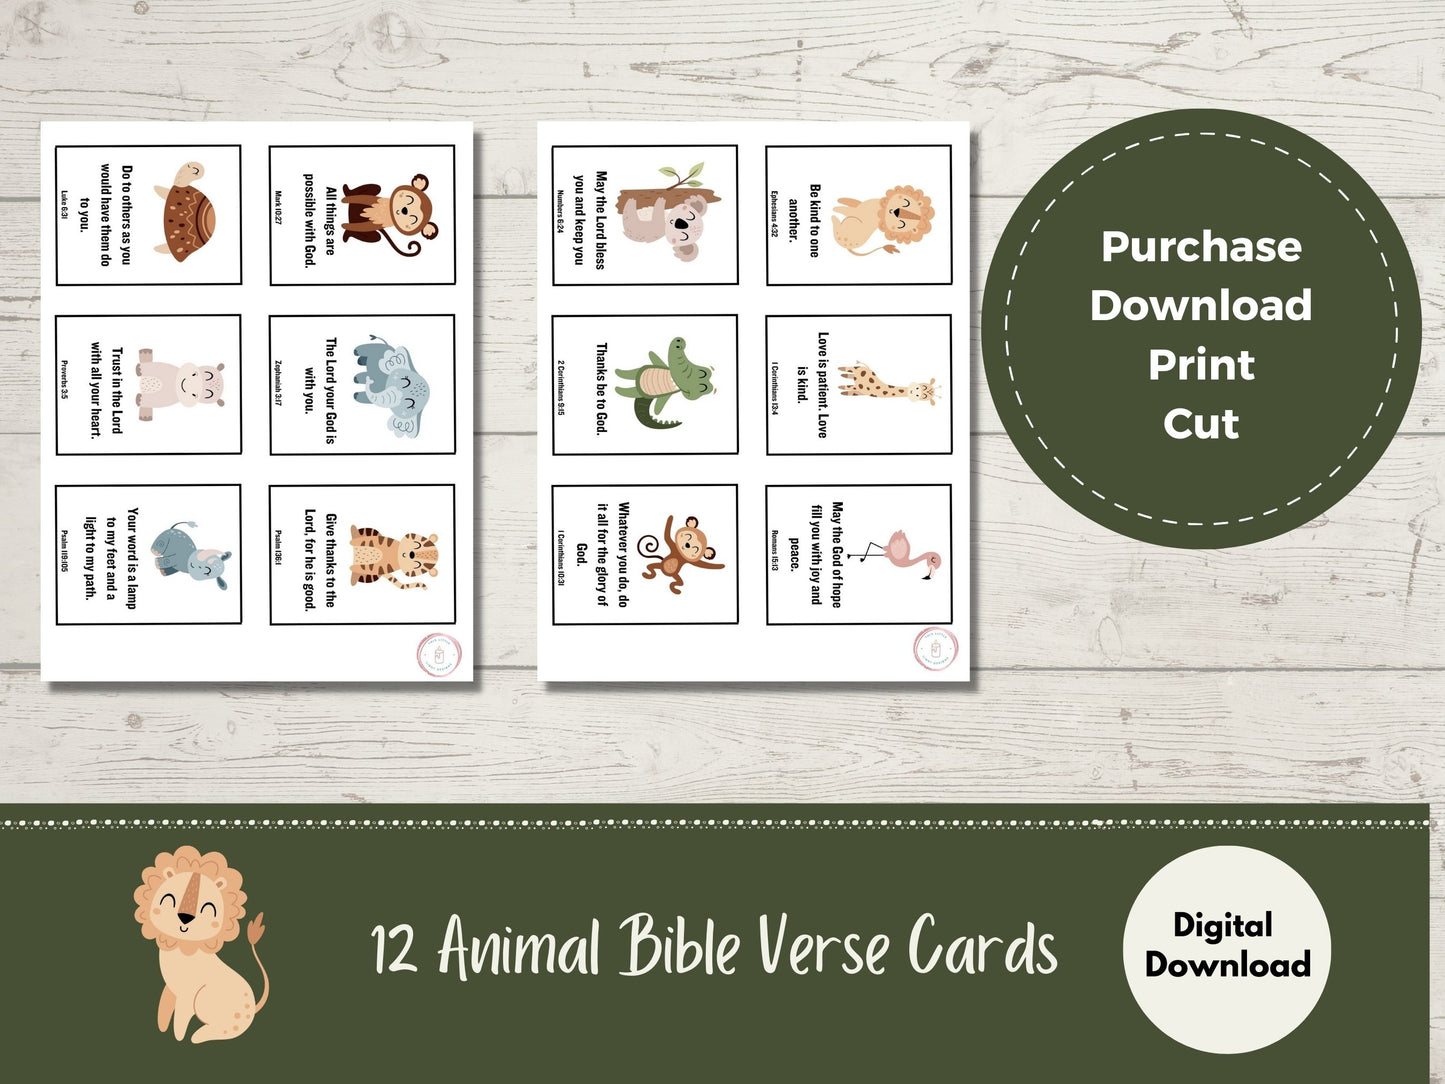 Children's Bible Verse Cards with Jungle Animals